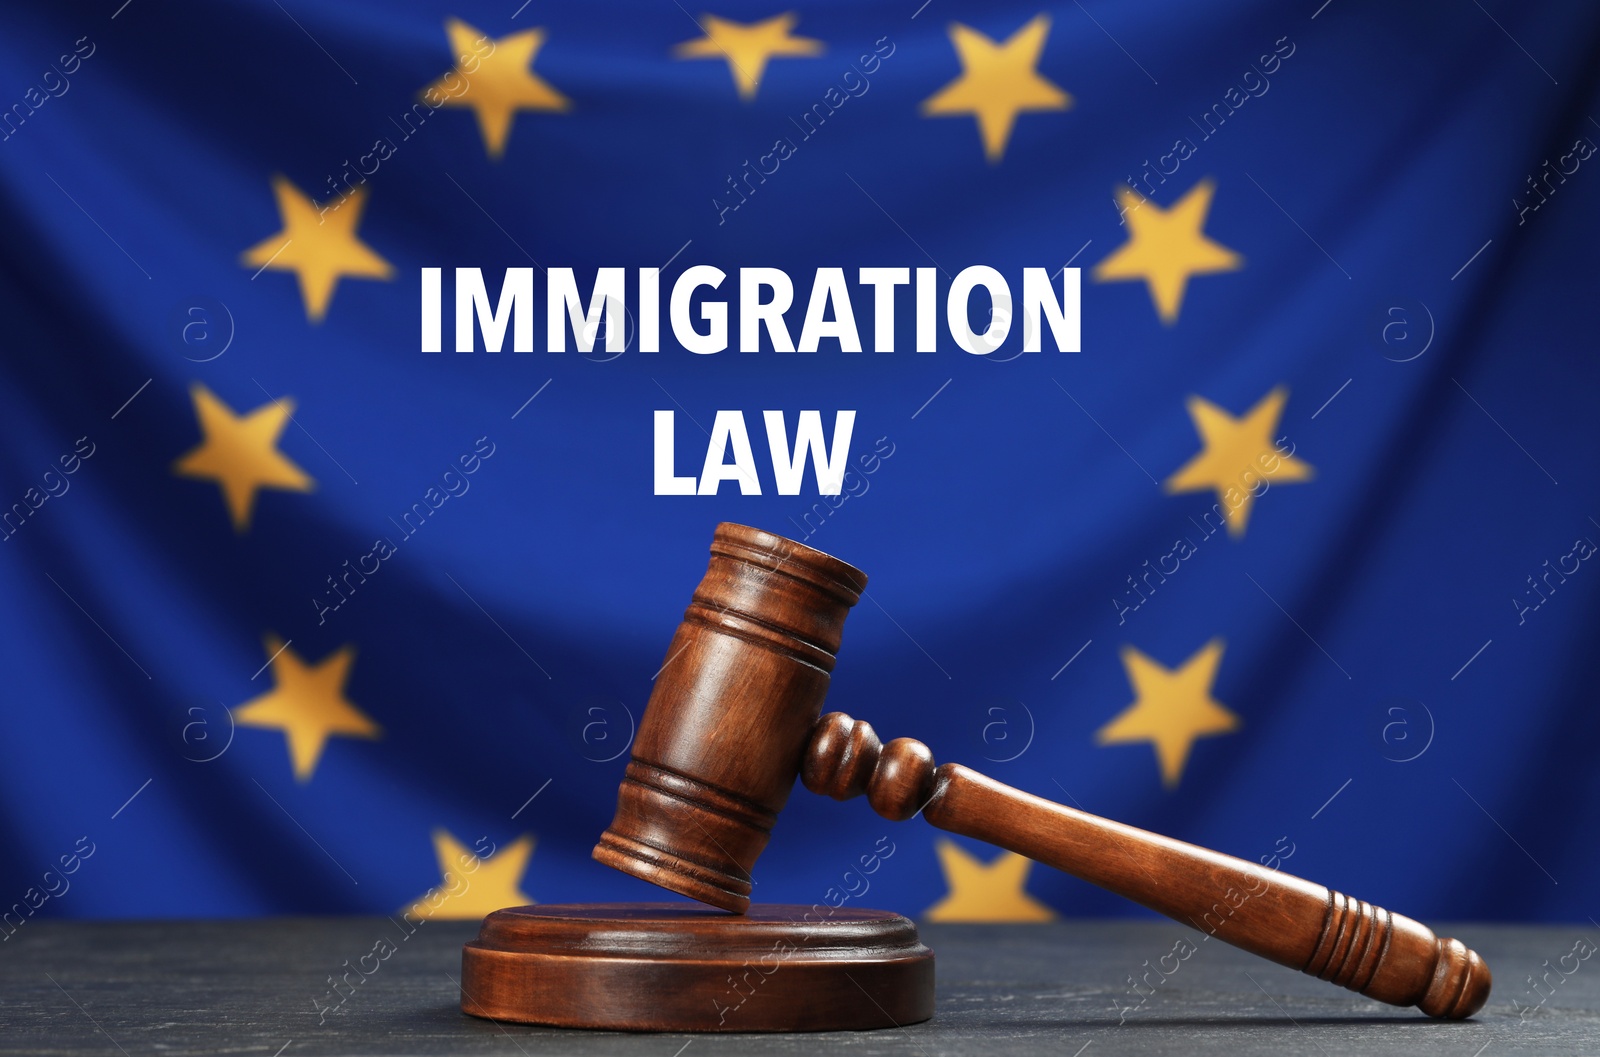 Image of Immigration law. Judge's gavel on black table against flag of European Union